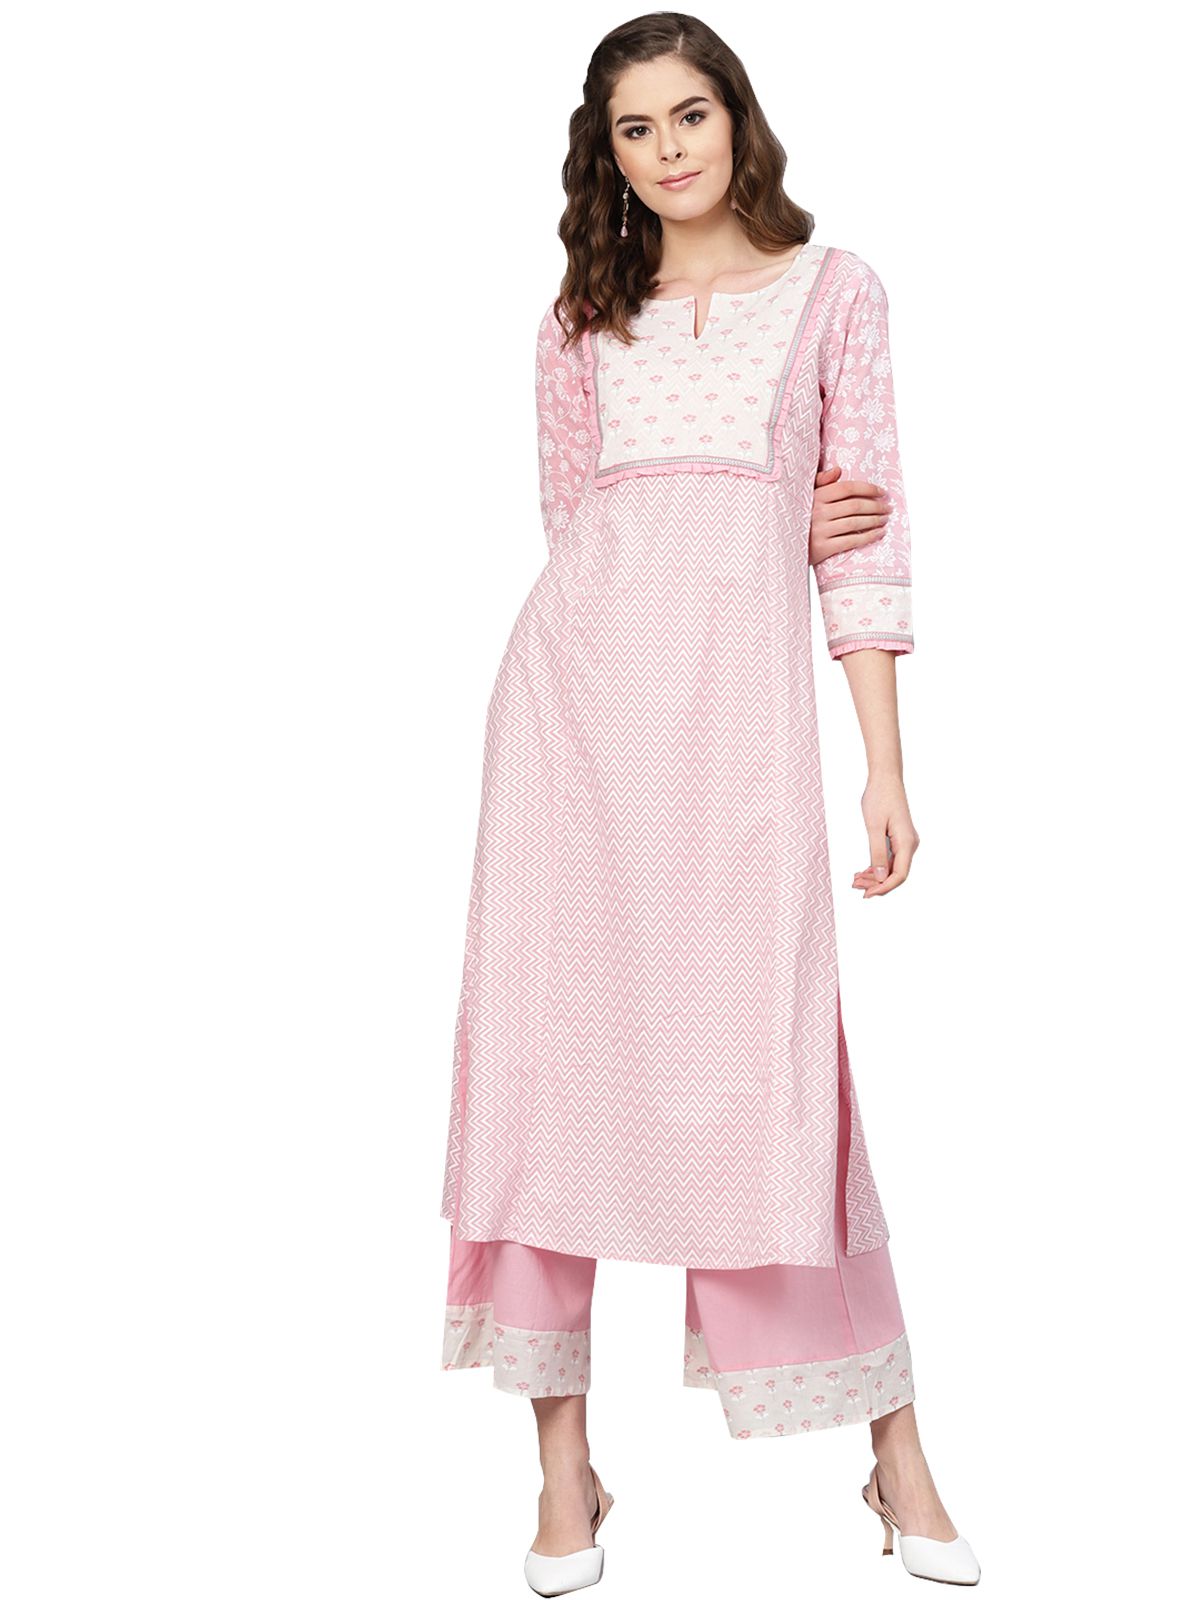 SHEWILL Rayon Kurti With Palazzo  Stitched Suit Single  Buy SHEWILL Rayon  Kurti With Palazzo  Stitched Suit Single Online at Low Price  Snapdealcom